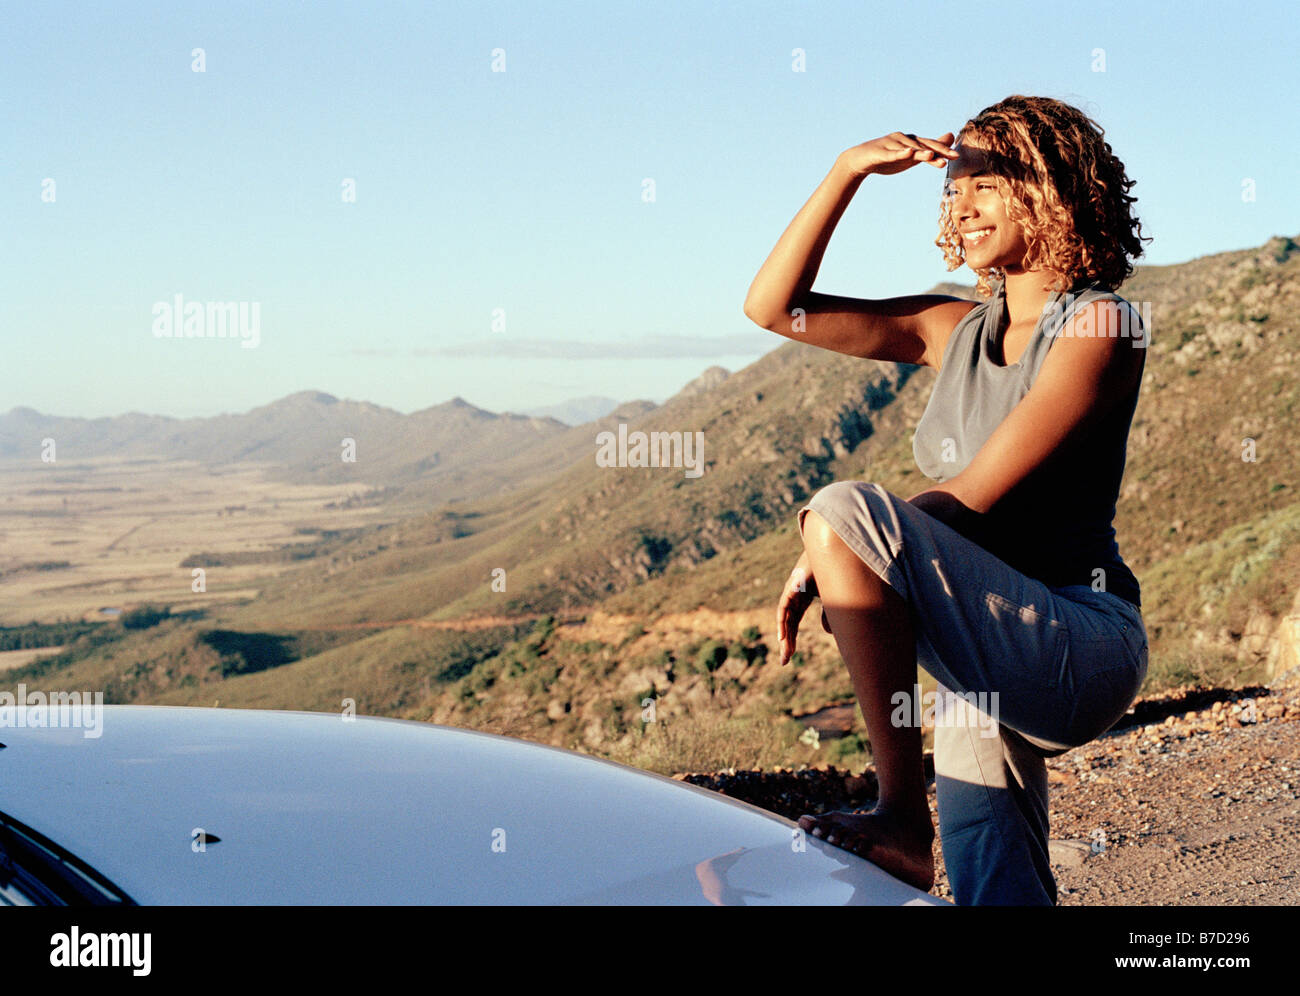 A young woman looking across an arid landscape Stock Photo